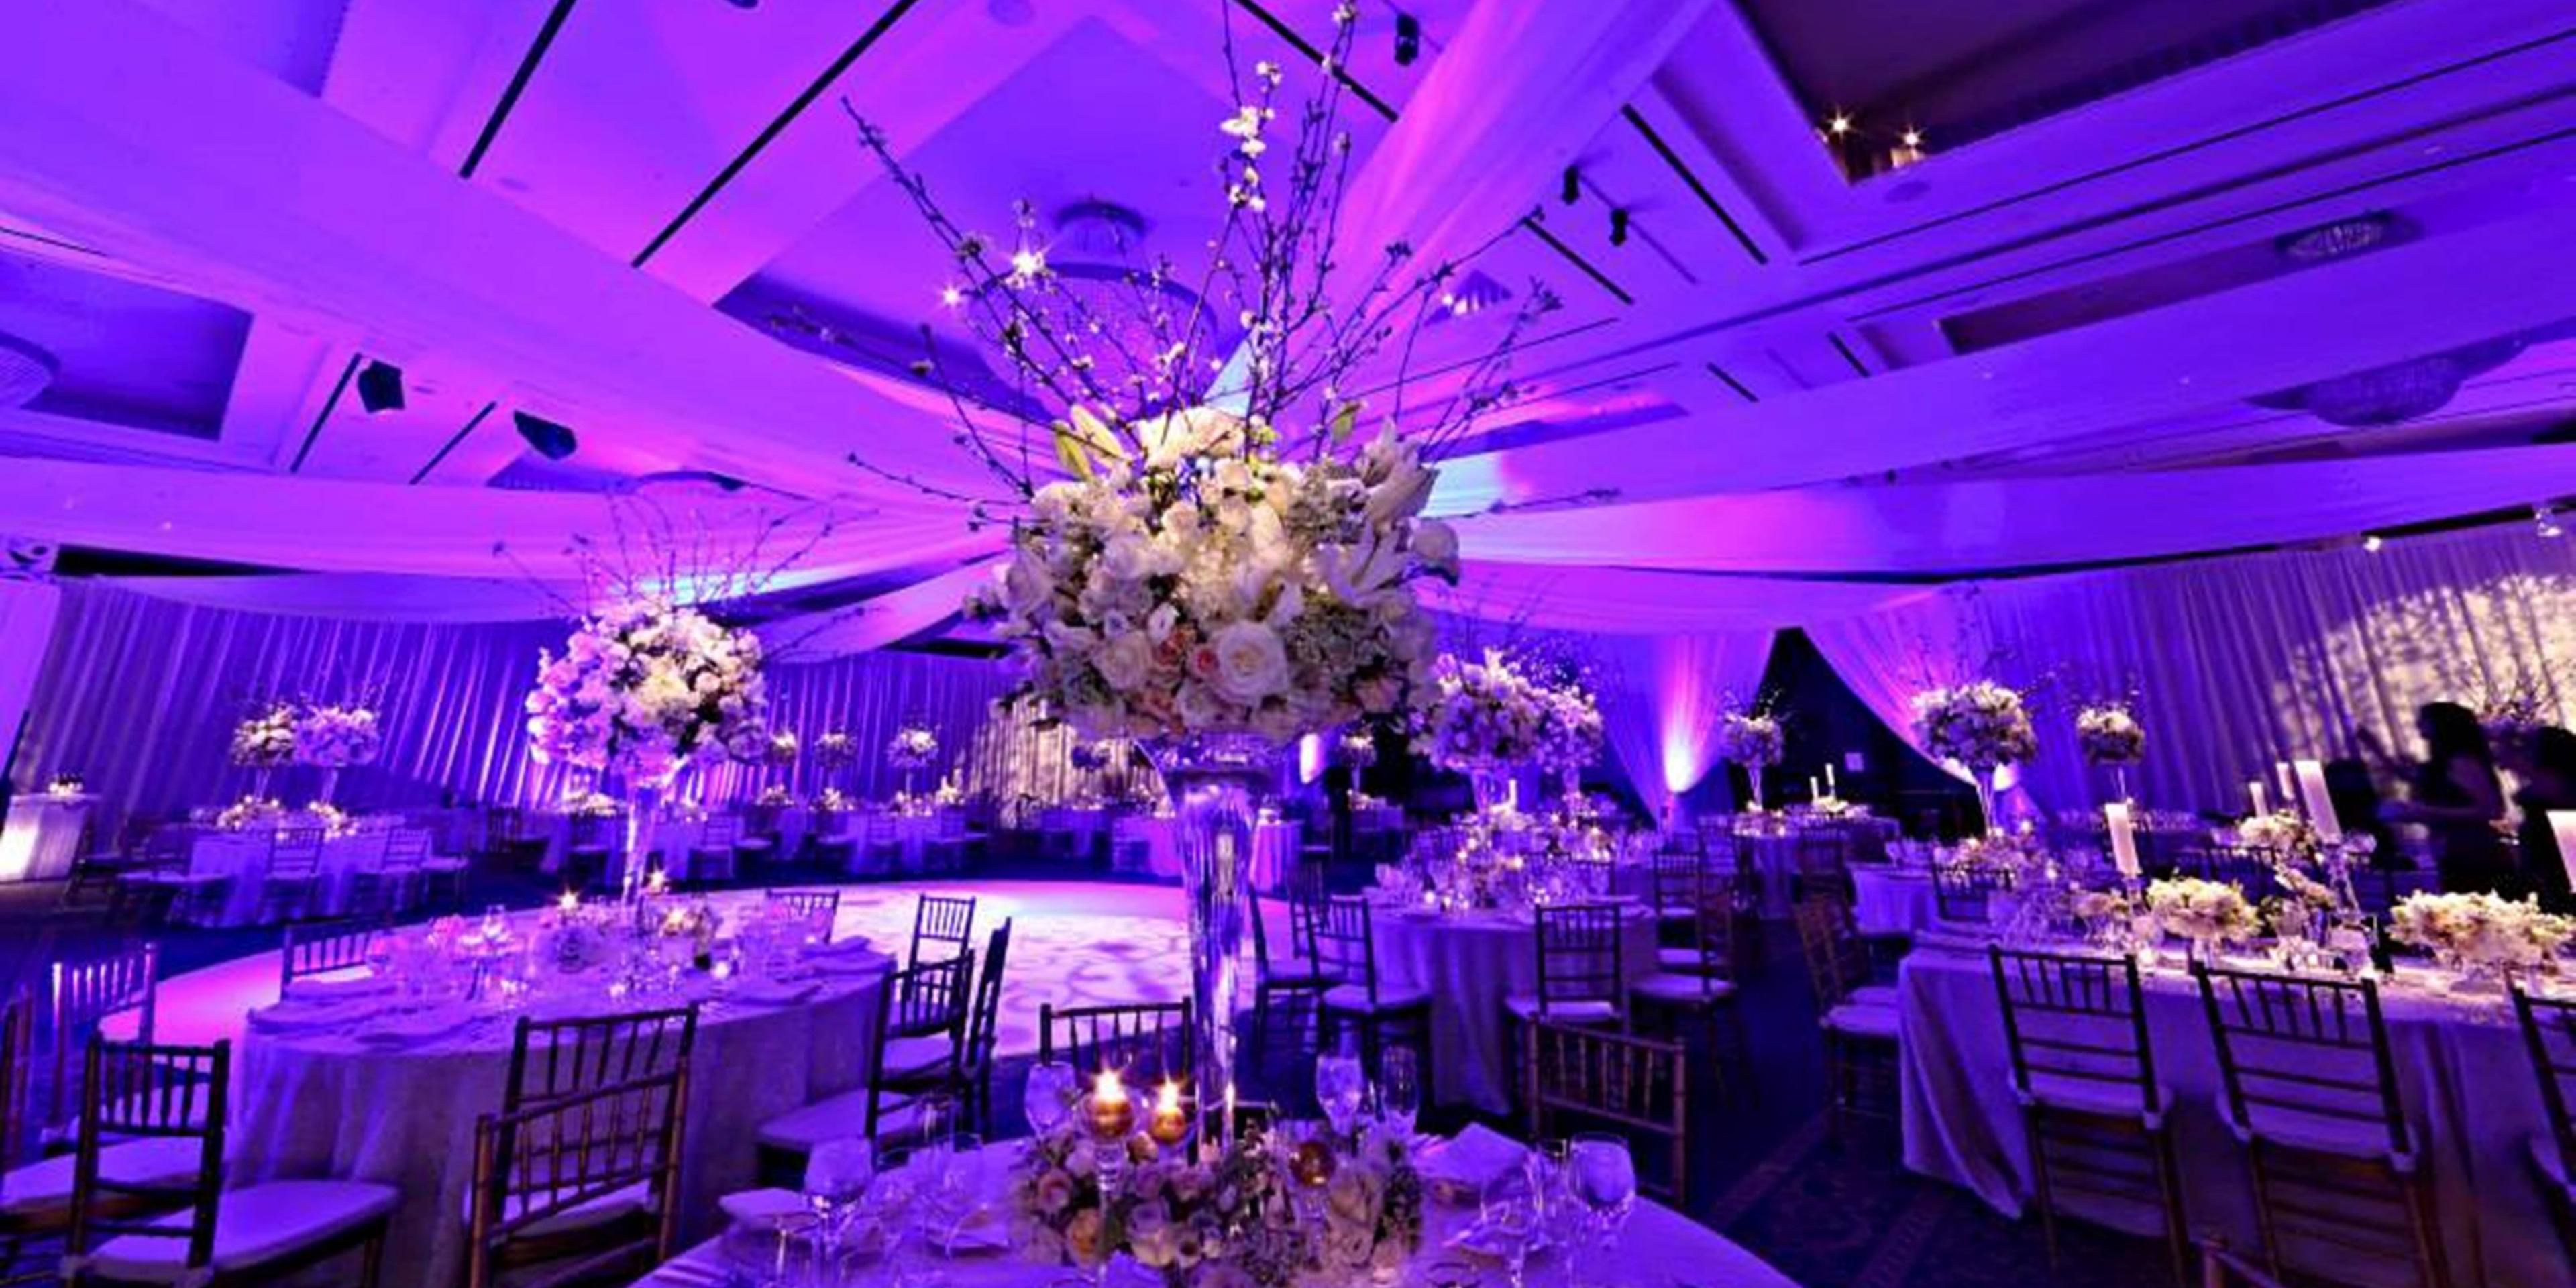 Our sophisticated event space has served as backdrop to some of Cleveland’s most exquisite weddings. 
With an elegant ballroom, glittering chandeliers, and delectable dining, our dedicated team will make your special day unforgettable.
